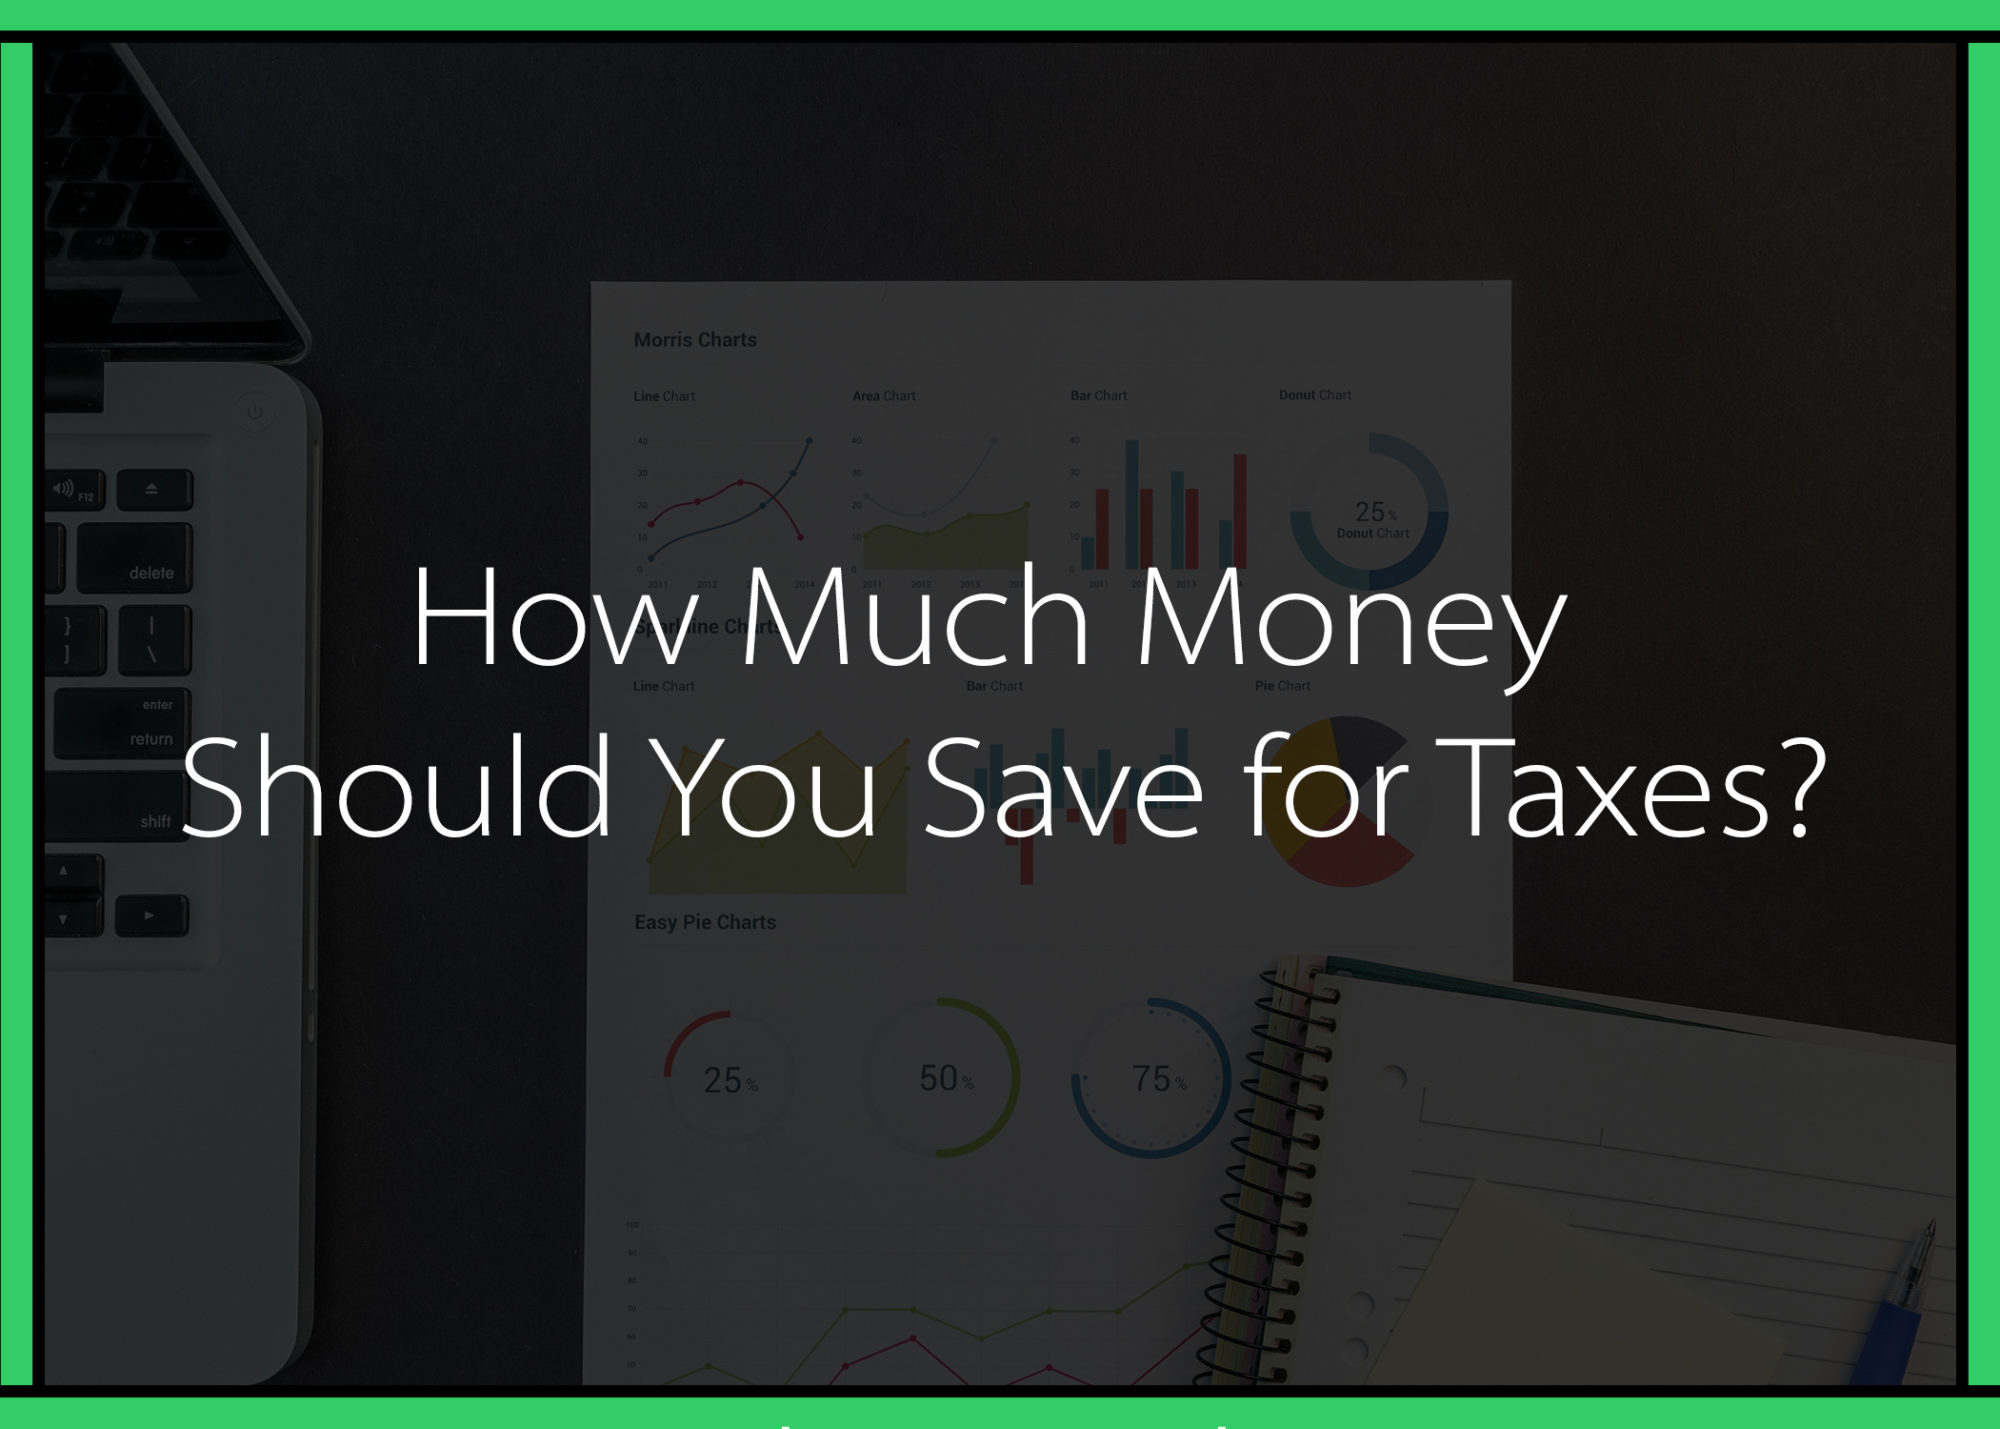 How Much Money Should You Save for Taxes